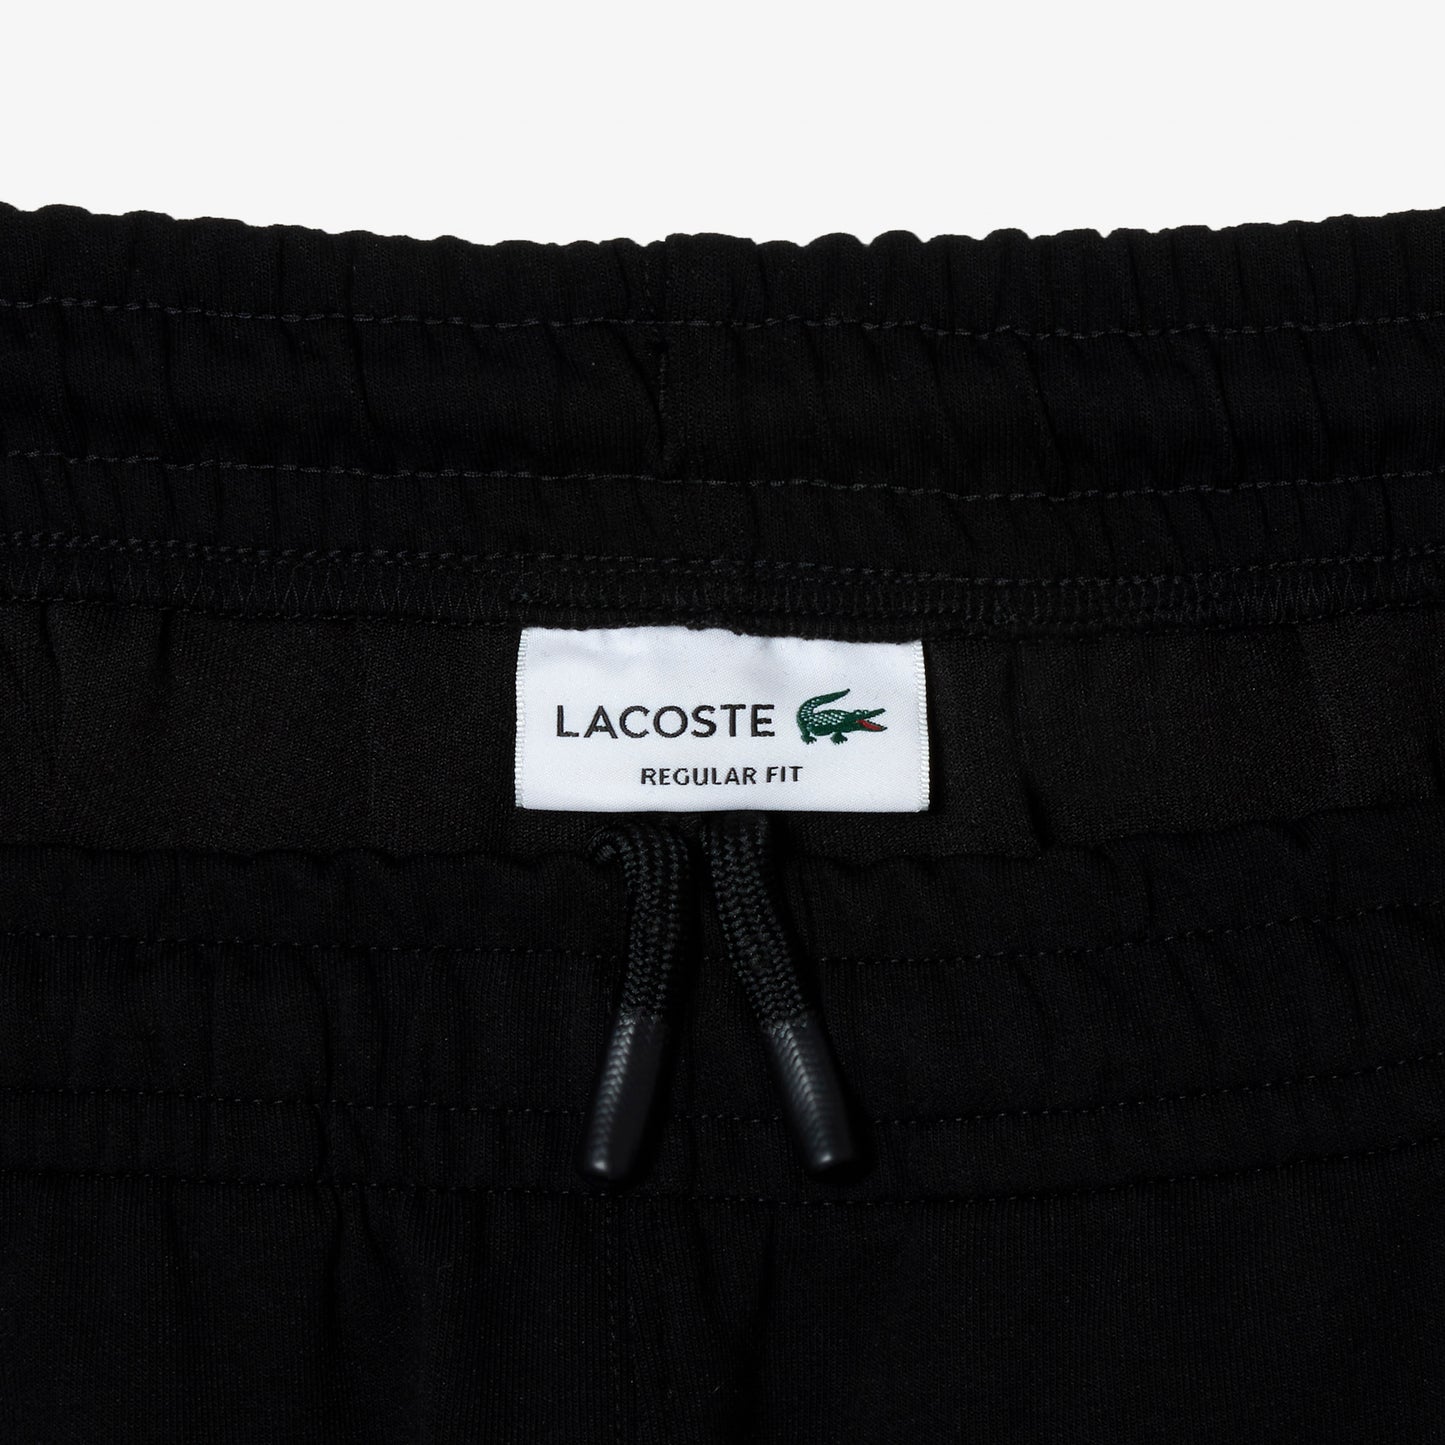 LACOSTE Men's Embroidered Sweatpants